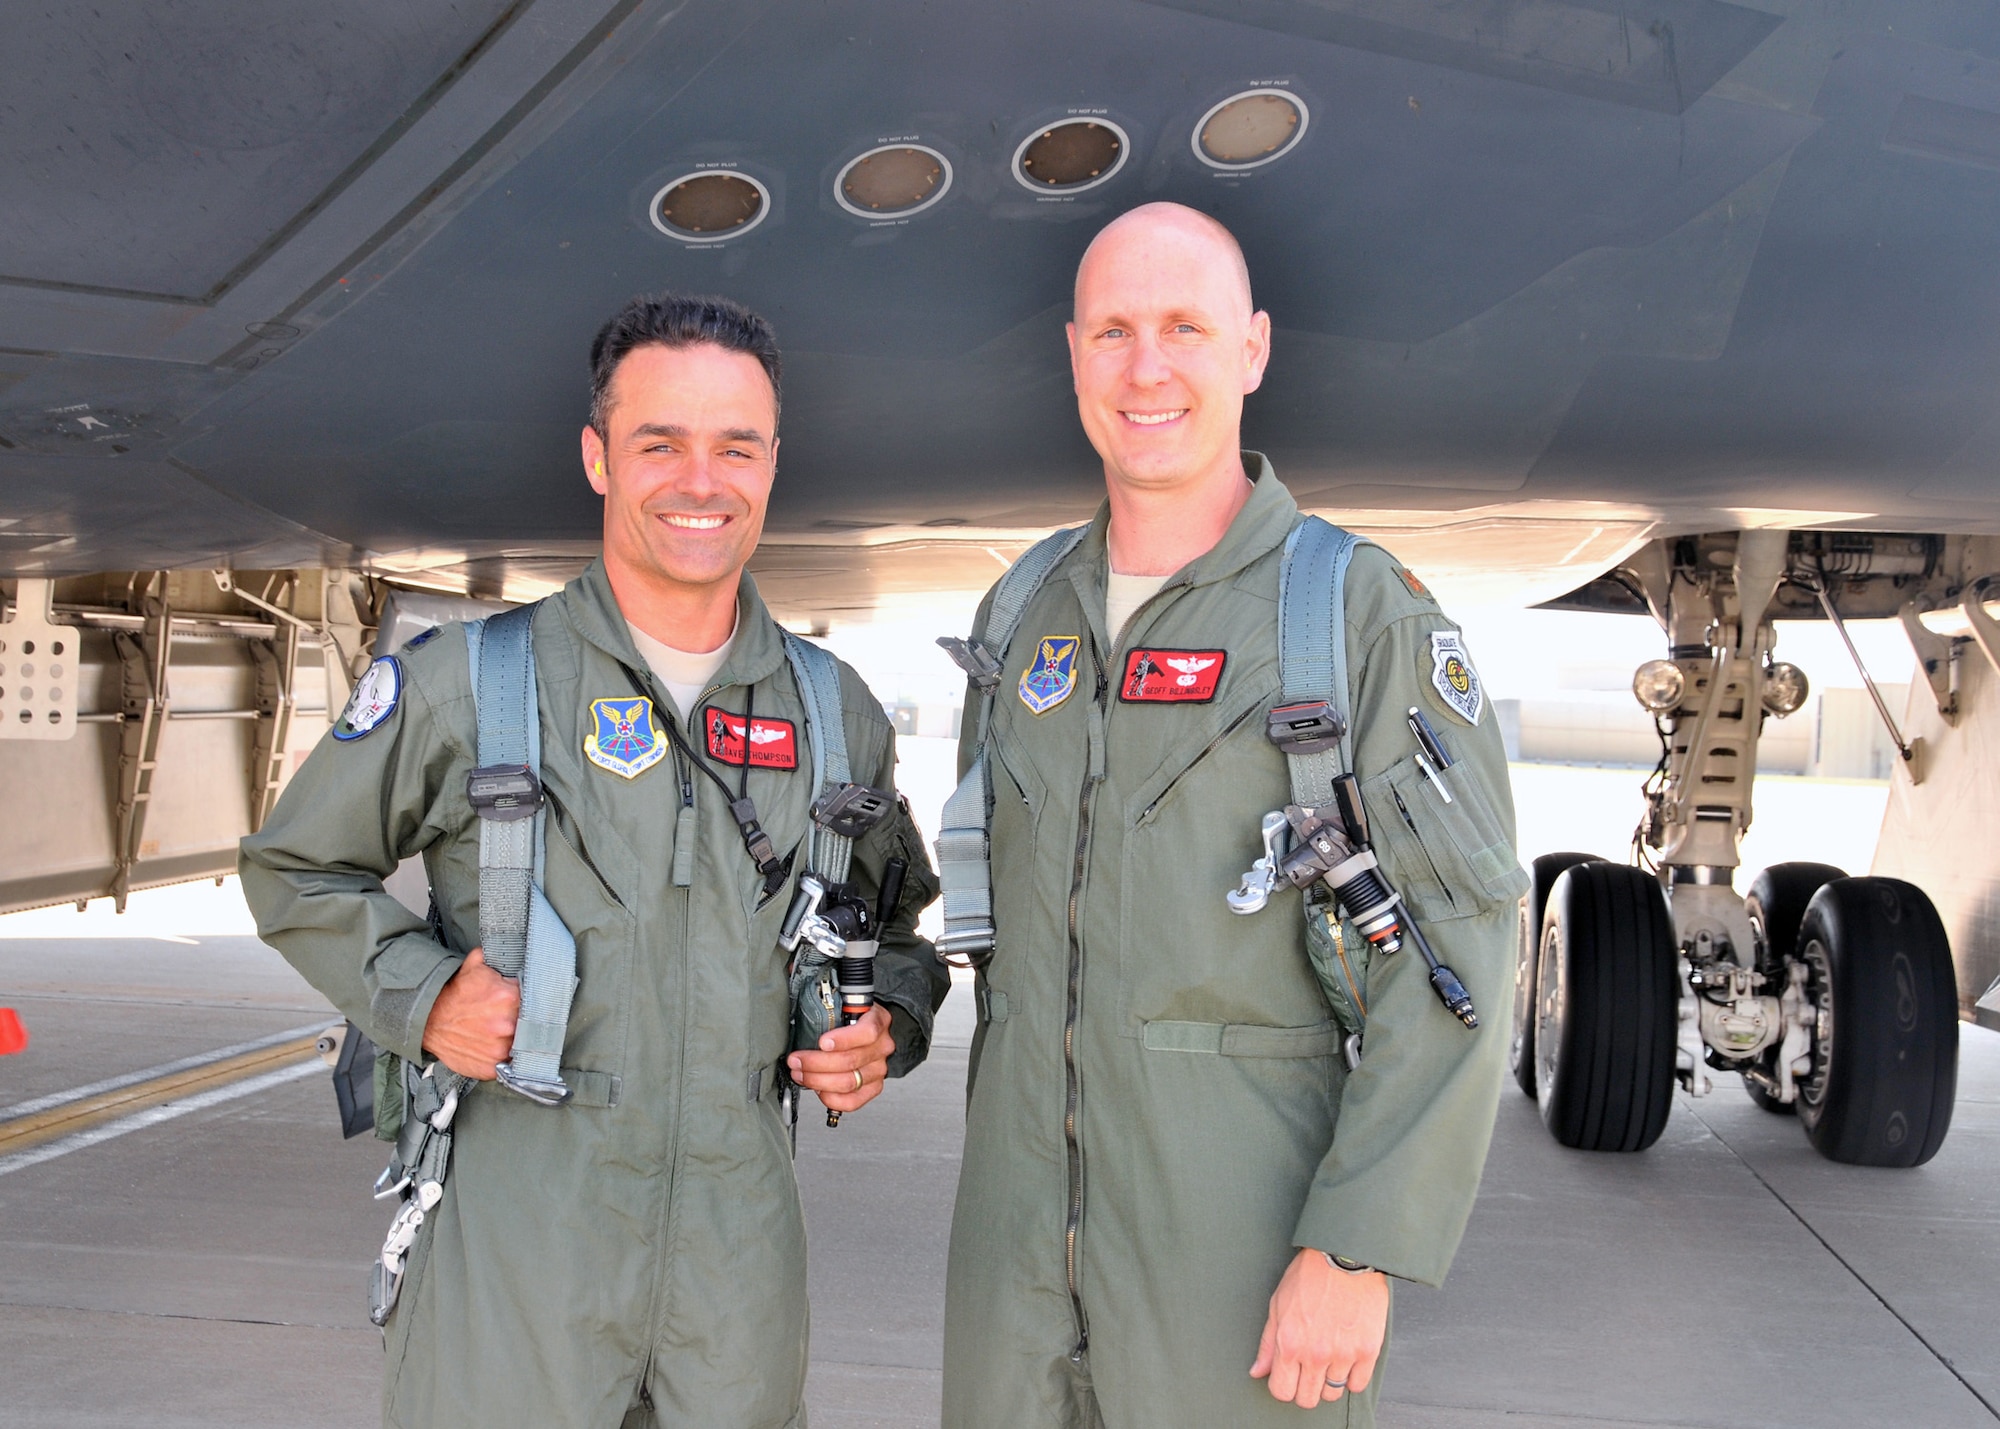 Lt. Col. Dave Thompson stands with Maj Geoffrey Billingsley under the B-2 "Spirit of Ohio," June 27.  Thompson just completed 1000 flying hours in the B-2 and Billingsley had achieved this mark just two weeks prior on June 13. Only 31 pilots have ever reached 1000 B-2 hours, and just thirteen still actively fly the B-2 Stealth Bomber.  Seven of these elite pilots are 131st Bomb Wing Missouri Air National Guard members at Whiteman Air Force Base:  Lt. Col. Rhett Binger,  Lt. Col. Mike Pyburn, Lt. Col. Dave Thompson,  Maj. Jared Kennish, Maj. John Avery,  Maj. Geoffrey Billingsley, and Lt. Col. Mike Means, who has over 1500 B-2 flying hours. (National Guard Photo by Senior Master Sgt. Mary-Dale Amison.  RELEASED)